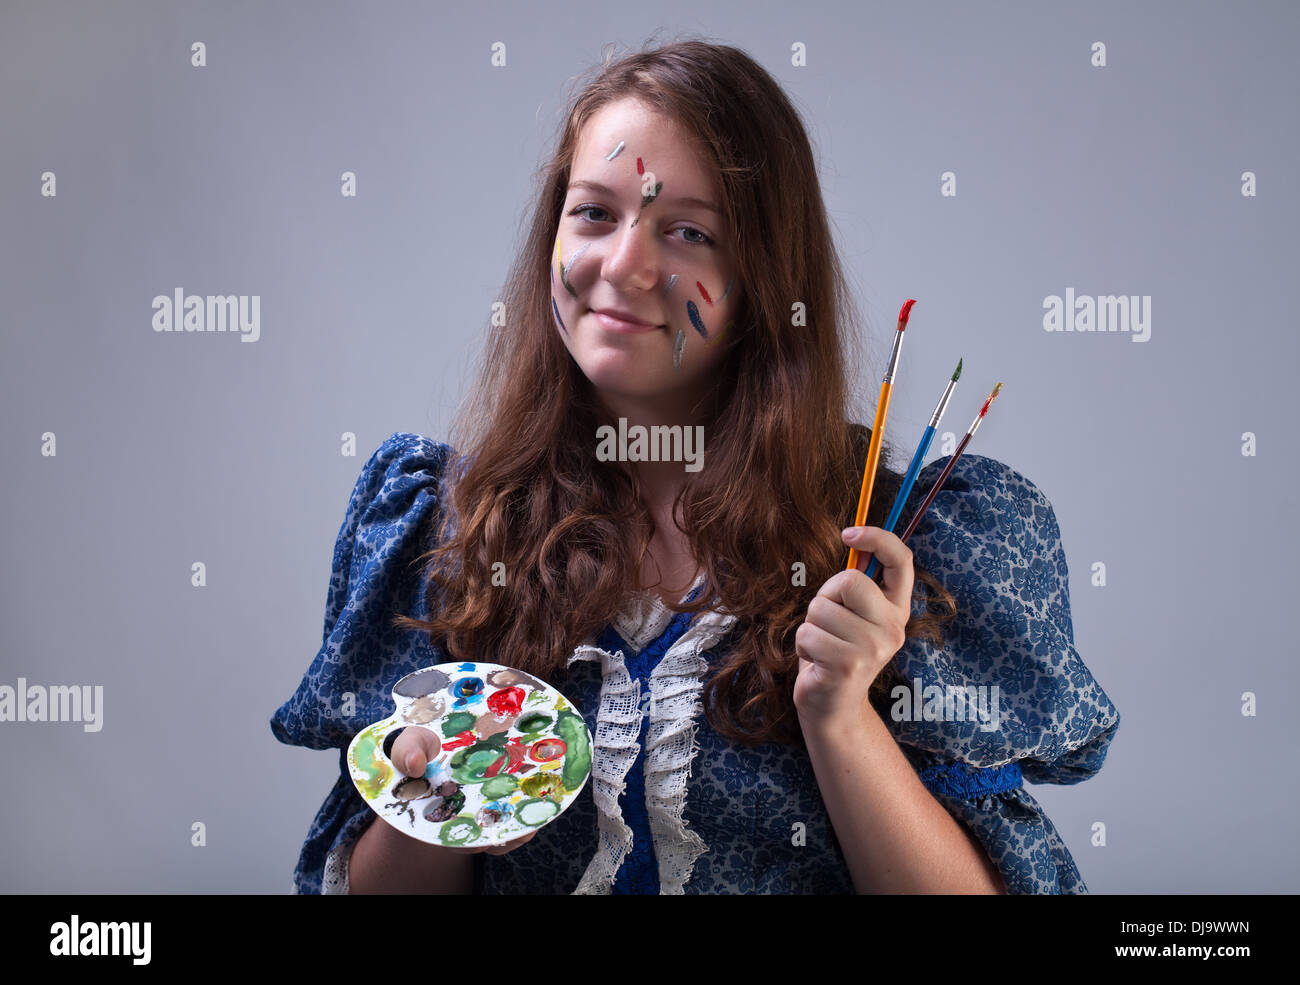 Young painter with smeary face holding palette and paintbrushes Stock Photo